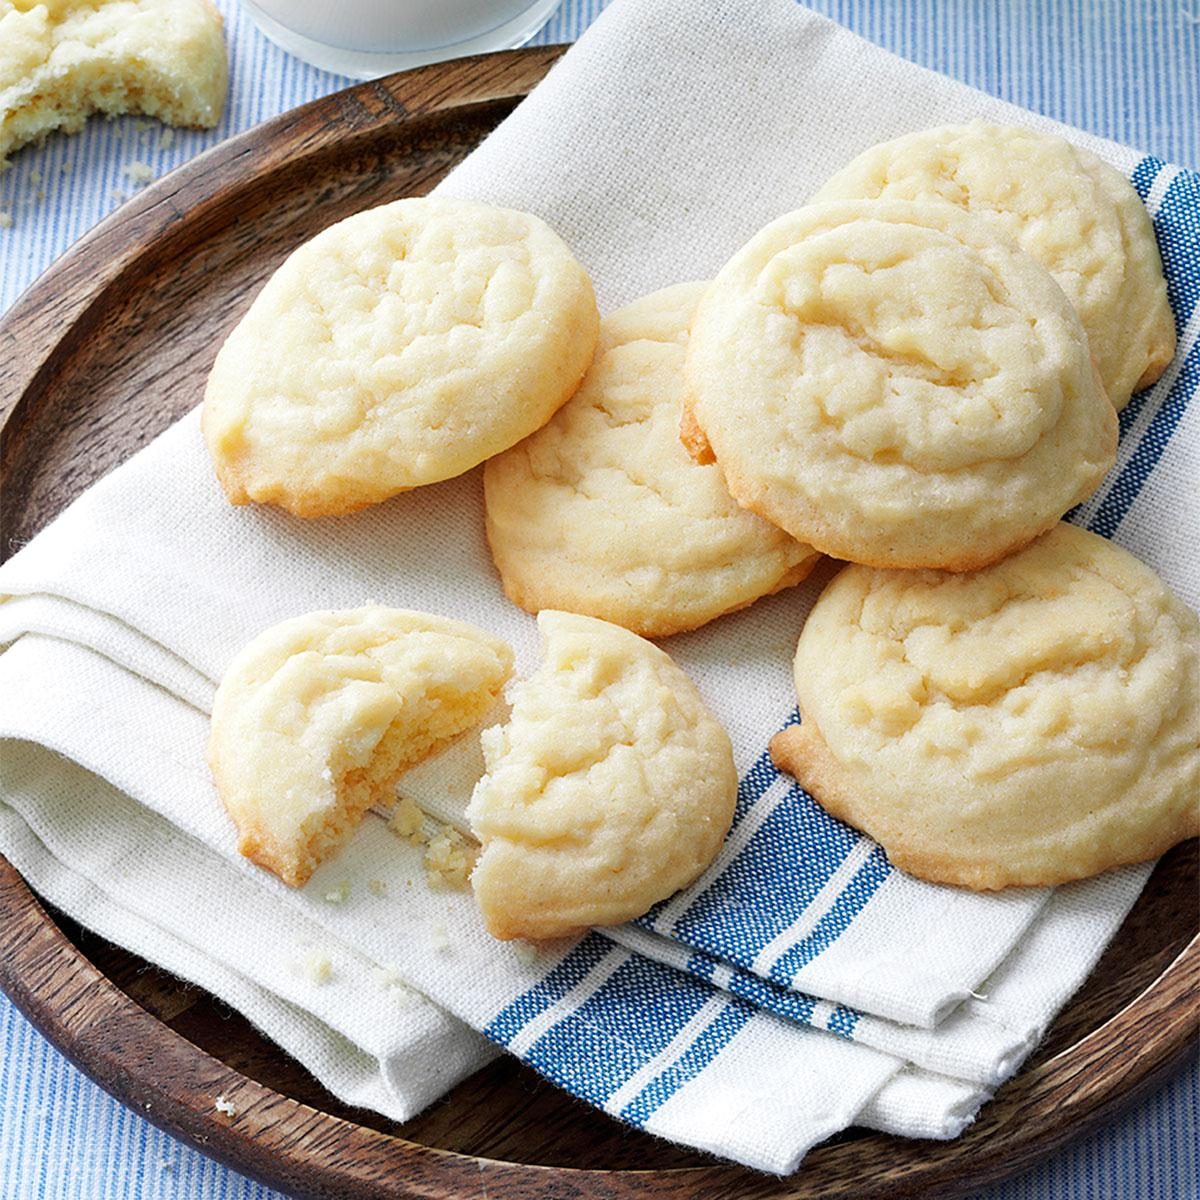 Amish Sugar Cookies Recipe: How to Make It